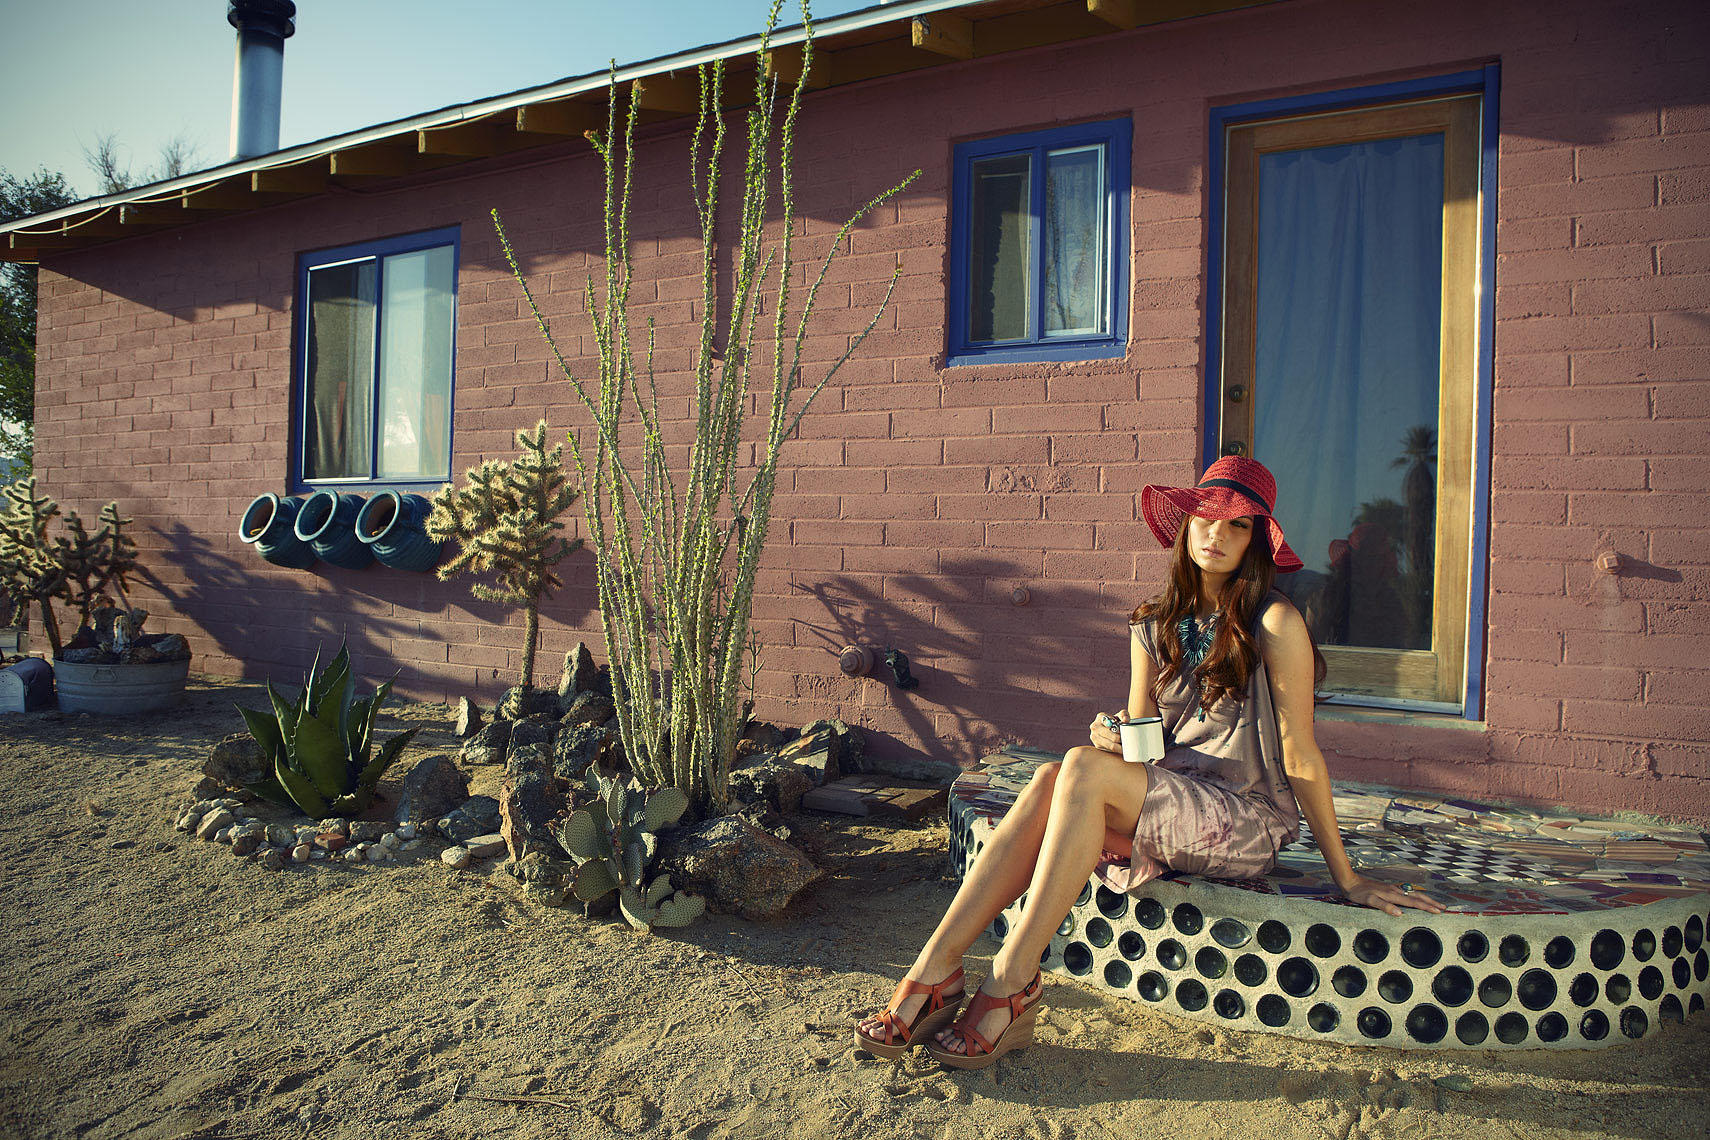 Red headed woman sitting on stoop with red floppy hat in front of pink house